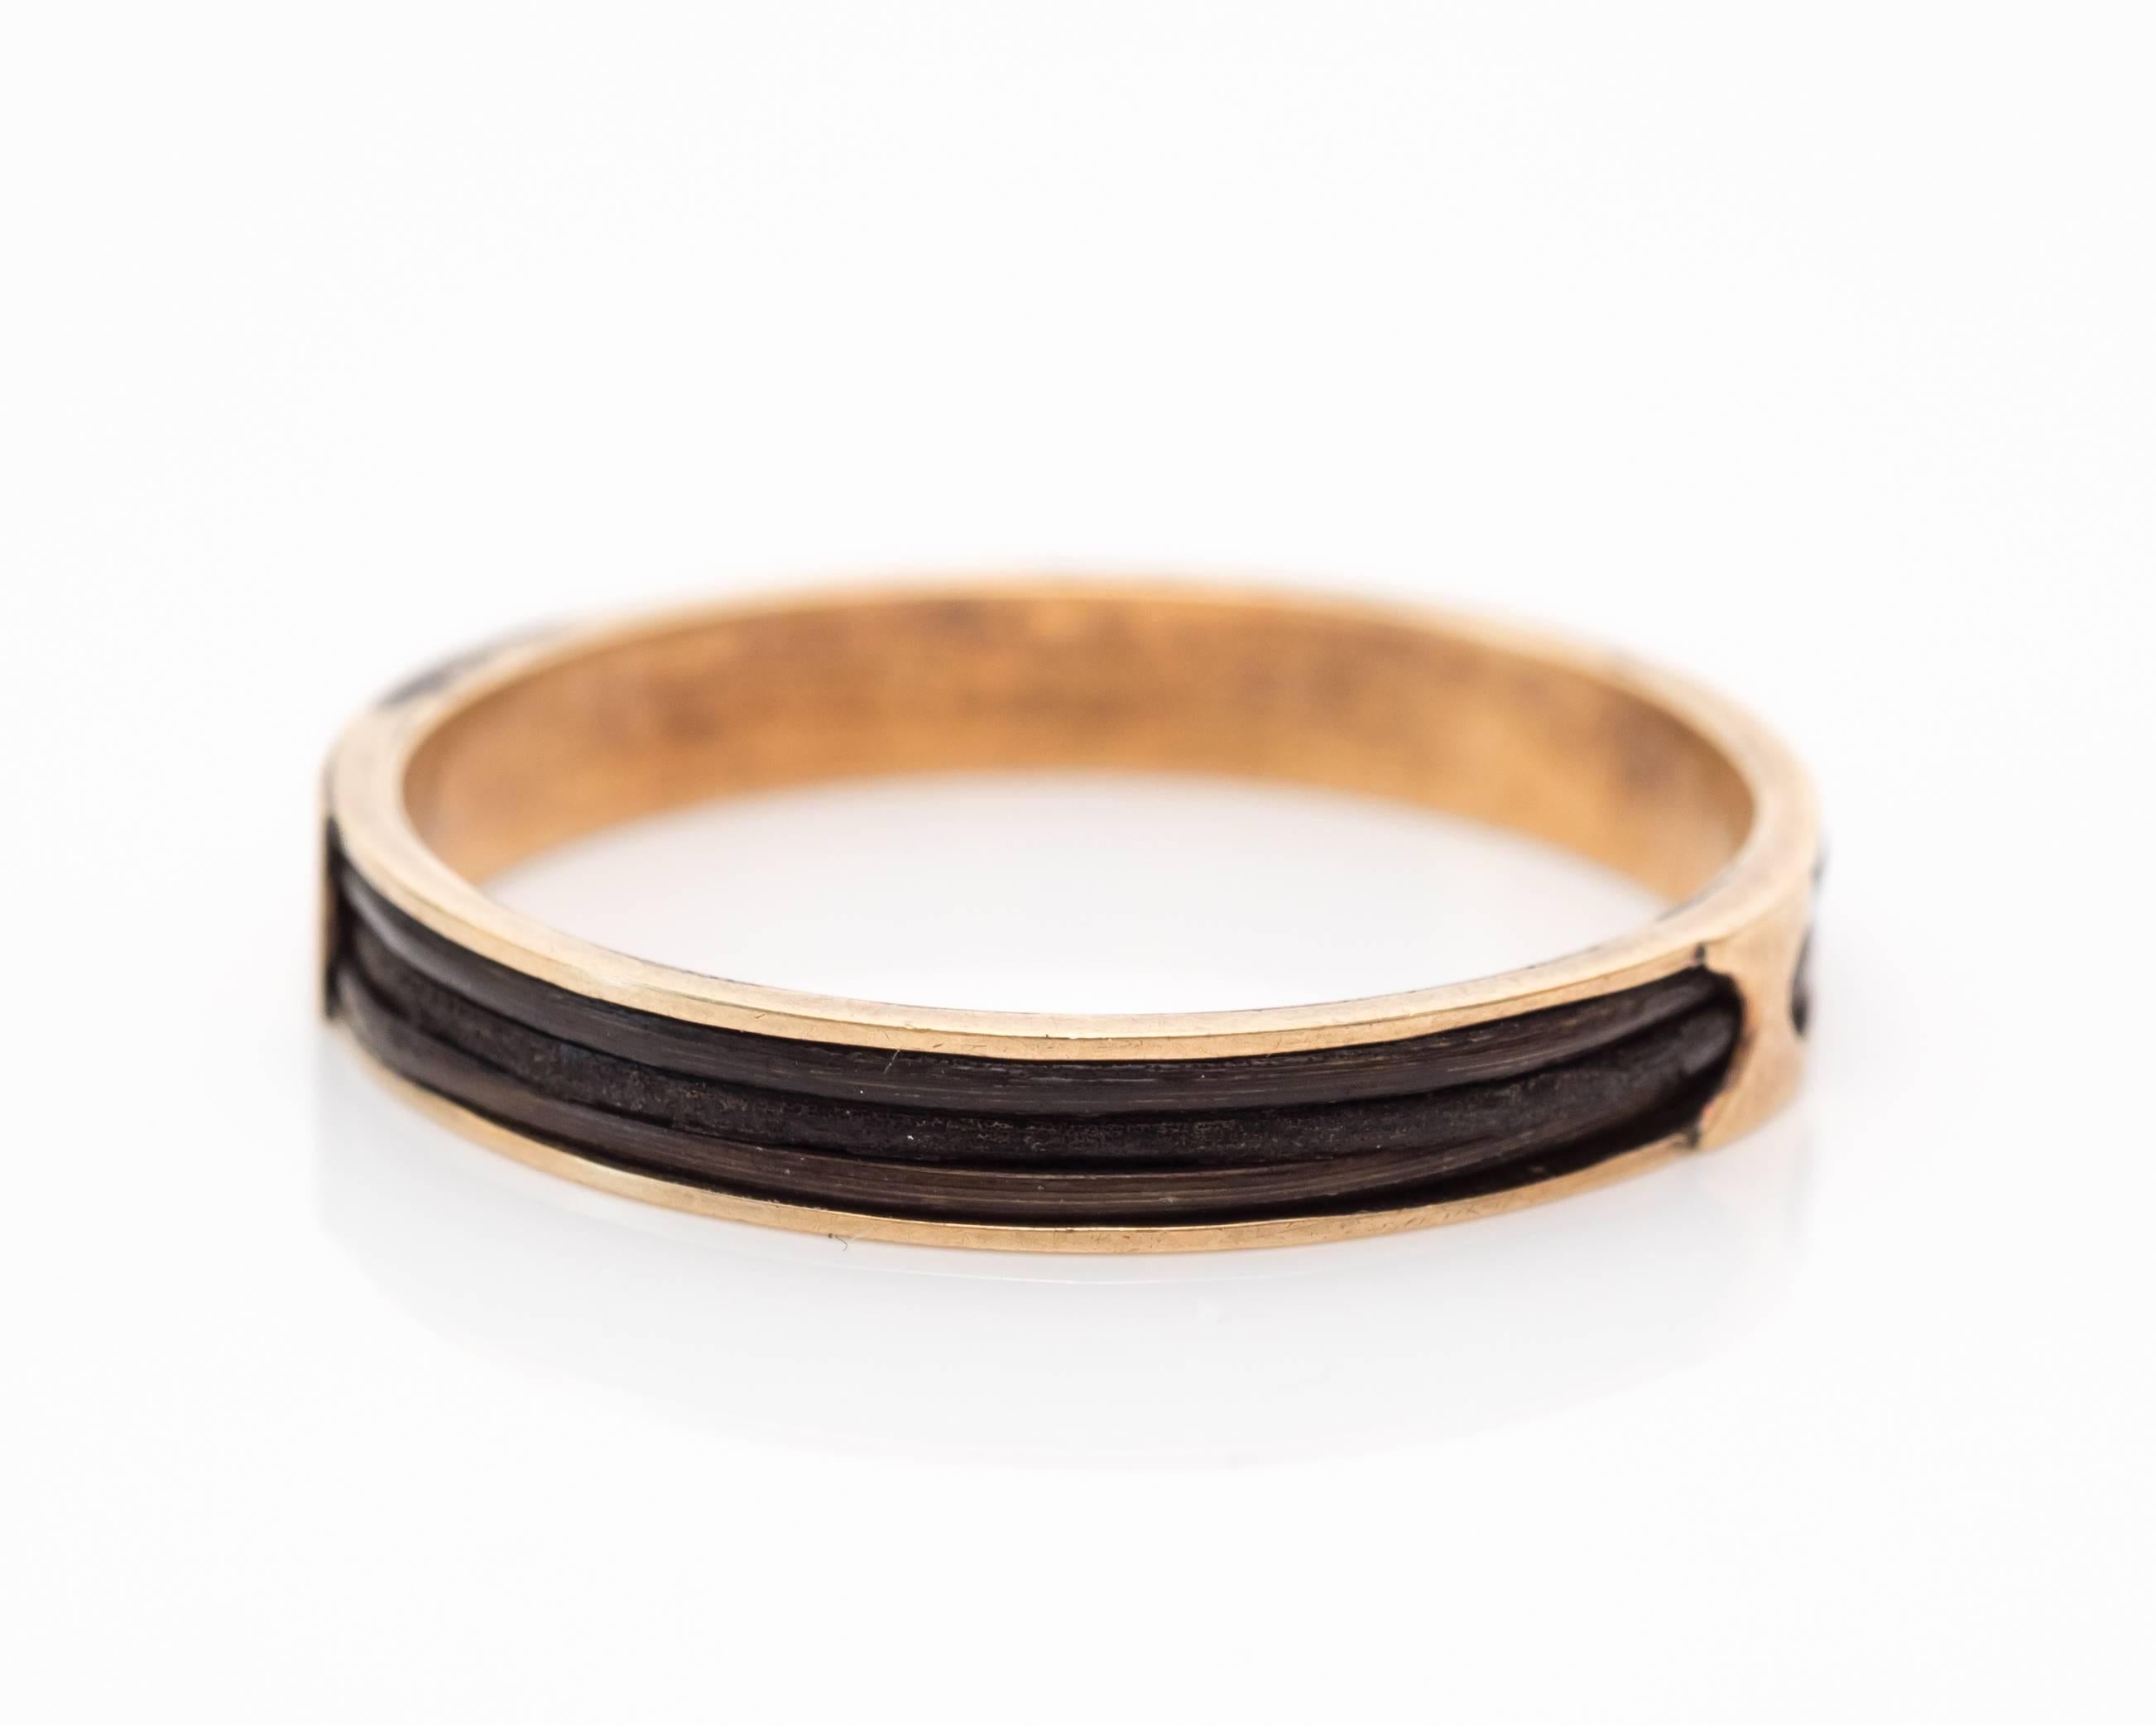 Mourning rings were worn by loved ones who had lost a significant other. This ring has space for where a monogram was once etched, but due to age it appears to have worn off from the gold. There is another gold accent on the opposite side of the